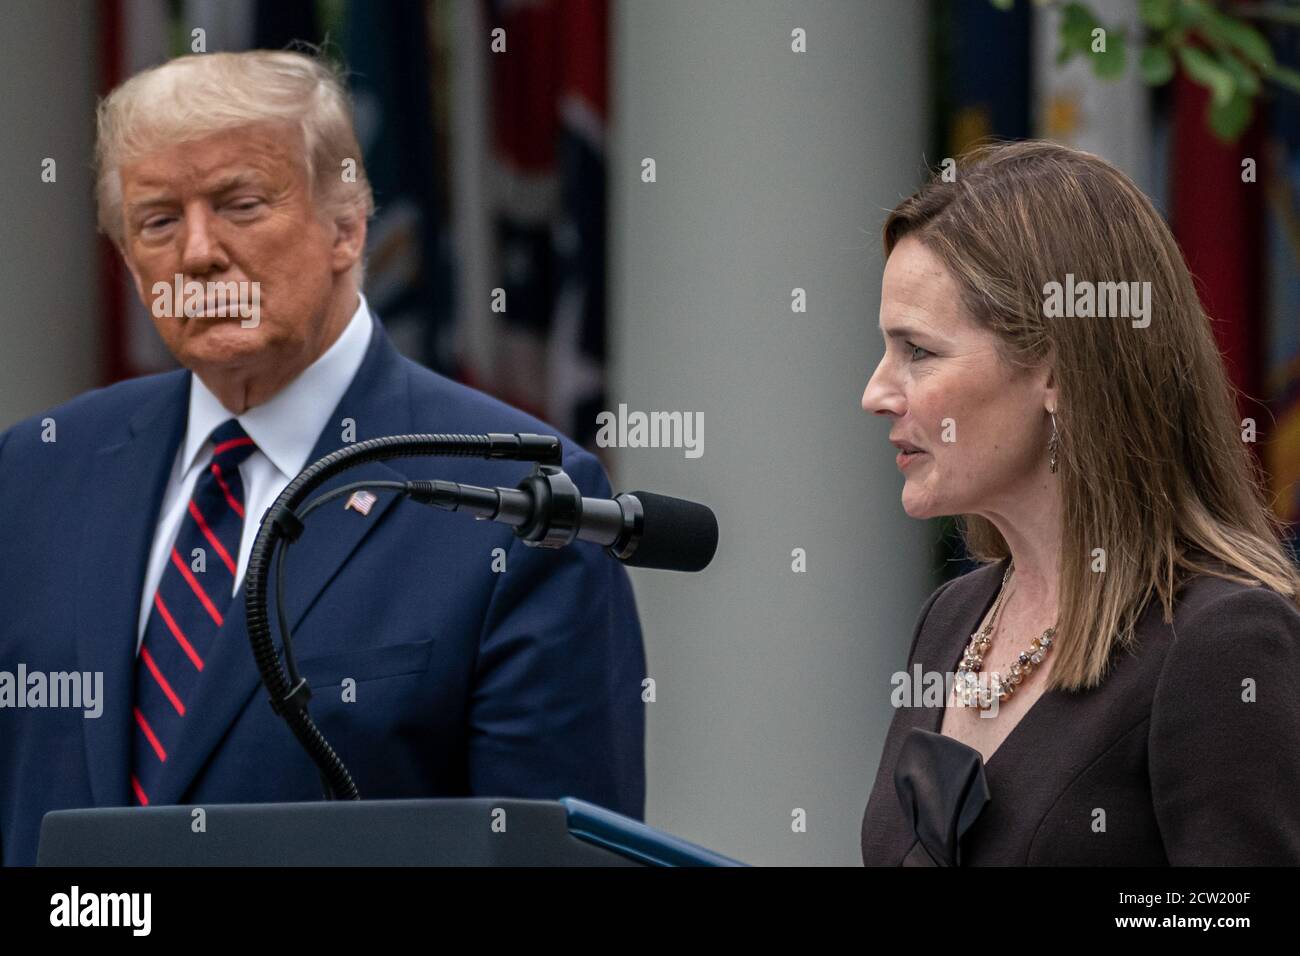 Judge Amy Coney Barrett, nominee for the Supreme Court seat left vacant by Justice Ruth Bader Ginsburg's death last week, speaks in the Rose Garden of the White House after President Donald Trump nominated her September 26, 2020 in Washington DC. The Republican-controlled Senate now has little time if they opt to confirm the nominee ahead of Election Day. (Photo by Photo Ken Cedeno/Sipa USA ) Credit: Sipa USA/Alamy Live News Stock Photo